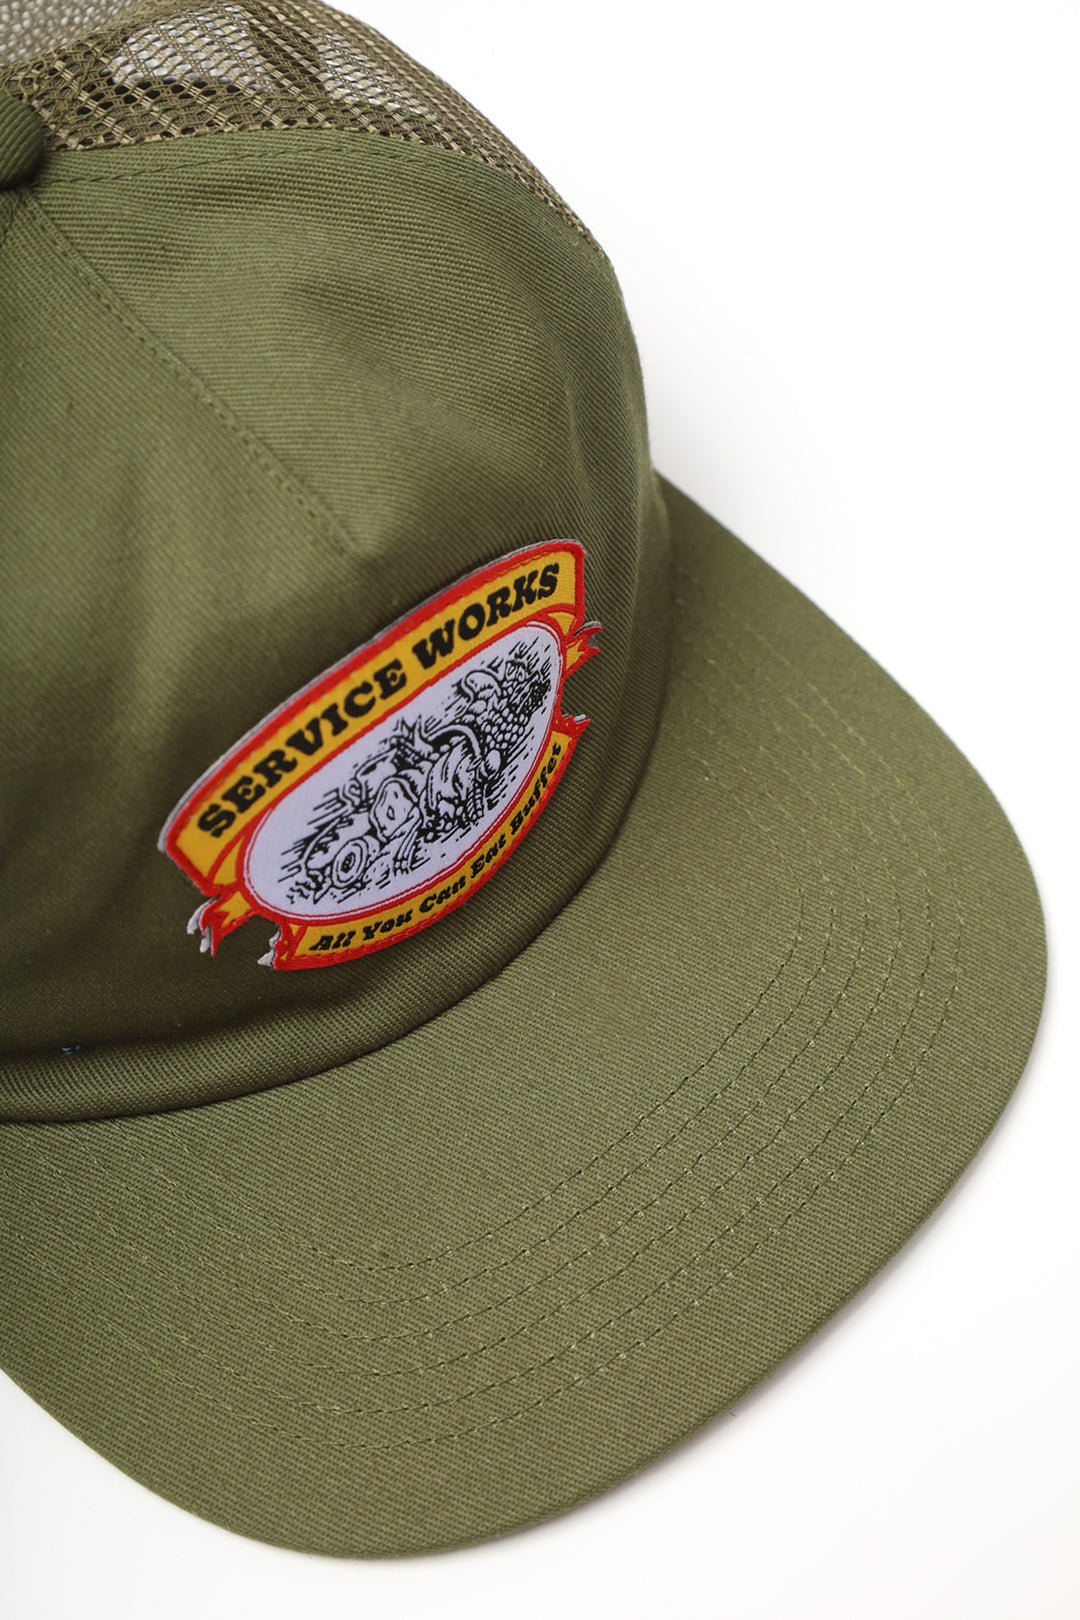 Service Works - All You Can Eat Trucker Cap -  Olive